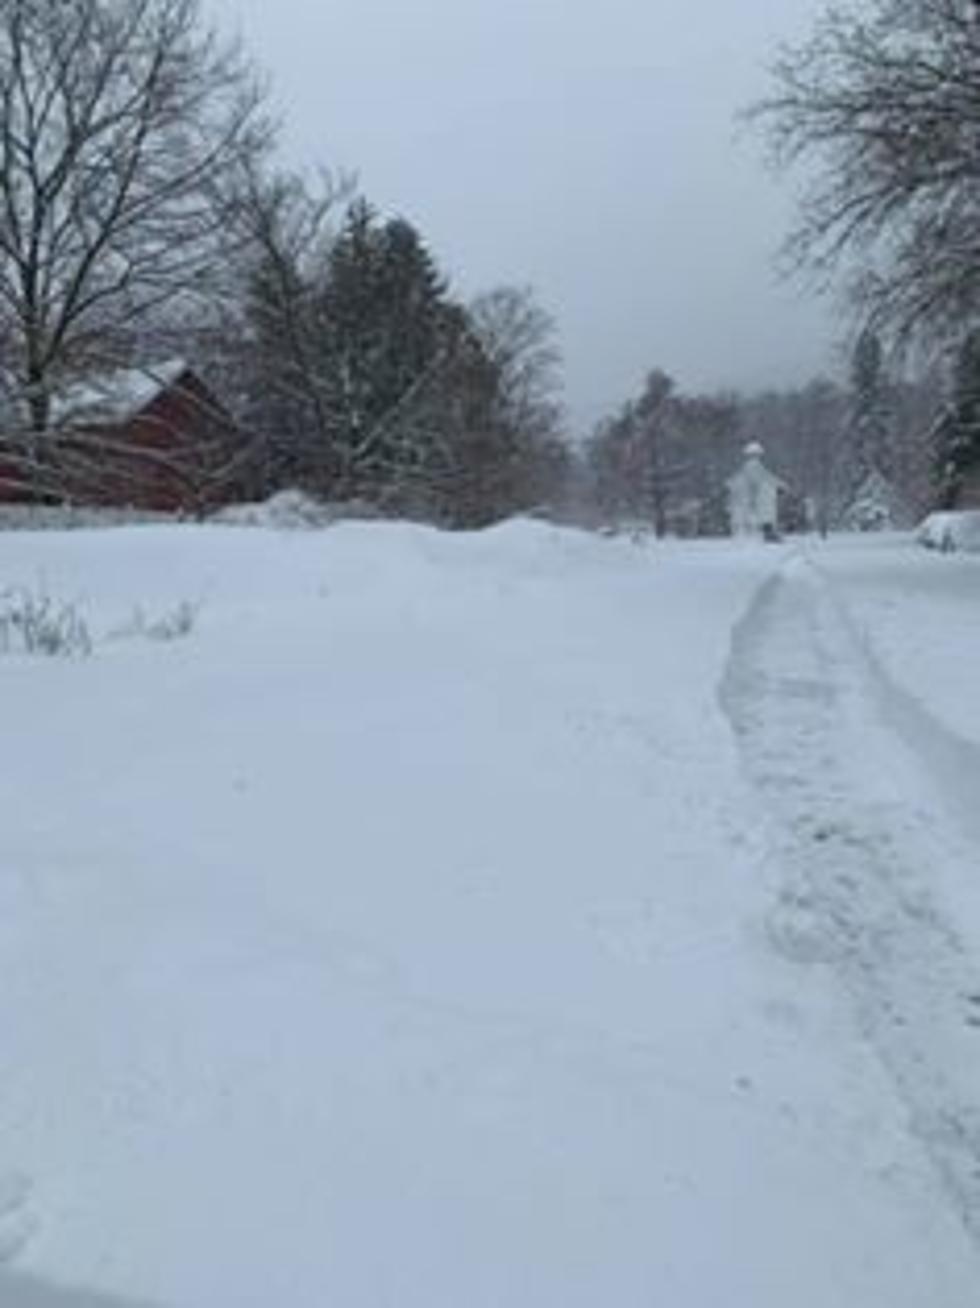 Capital Region Sees Worst Snow Storm in Years [PHOTOS]